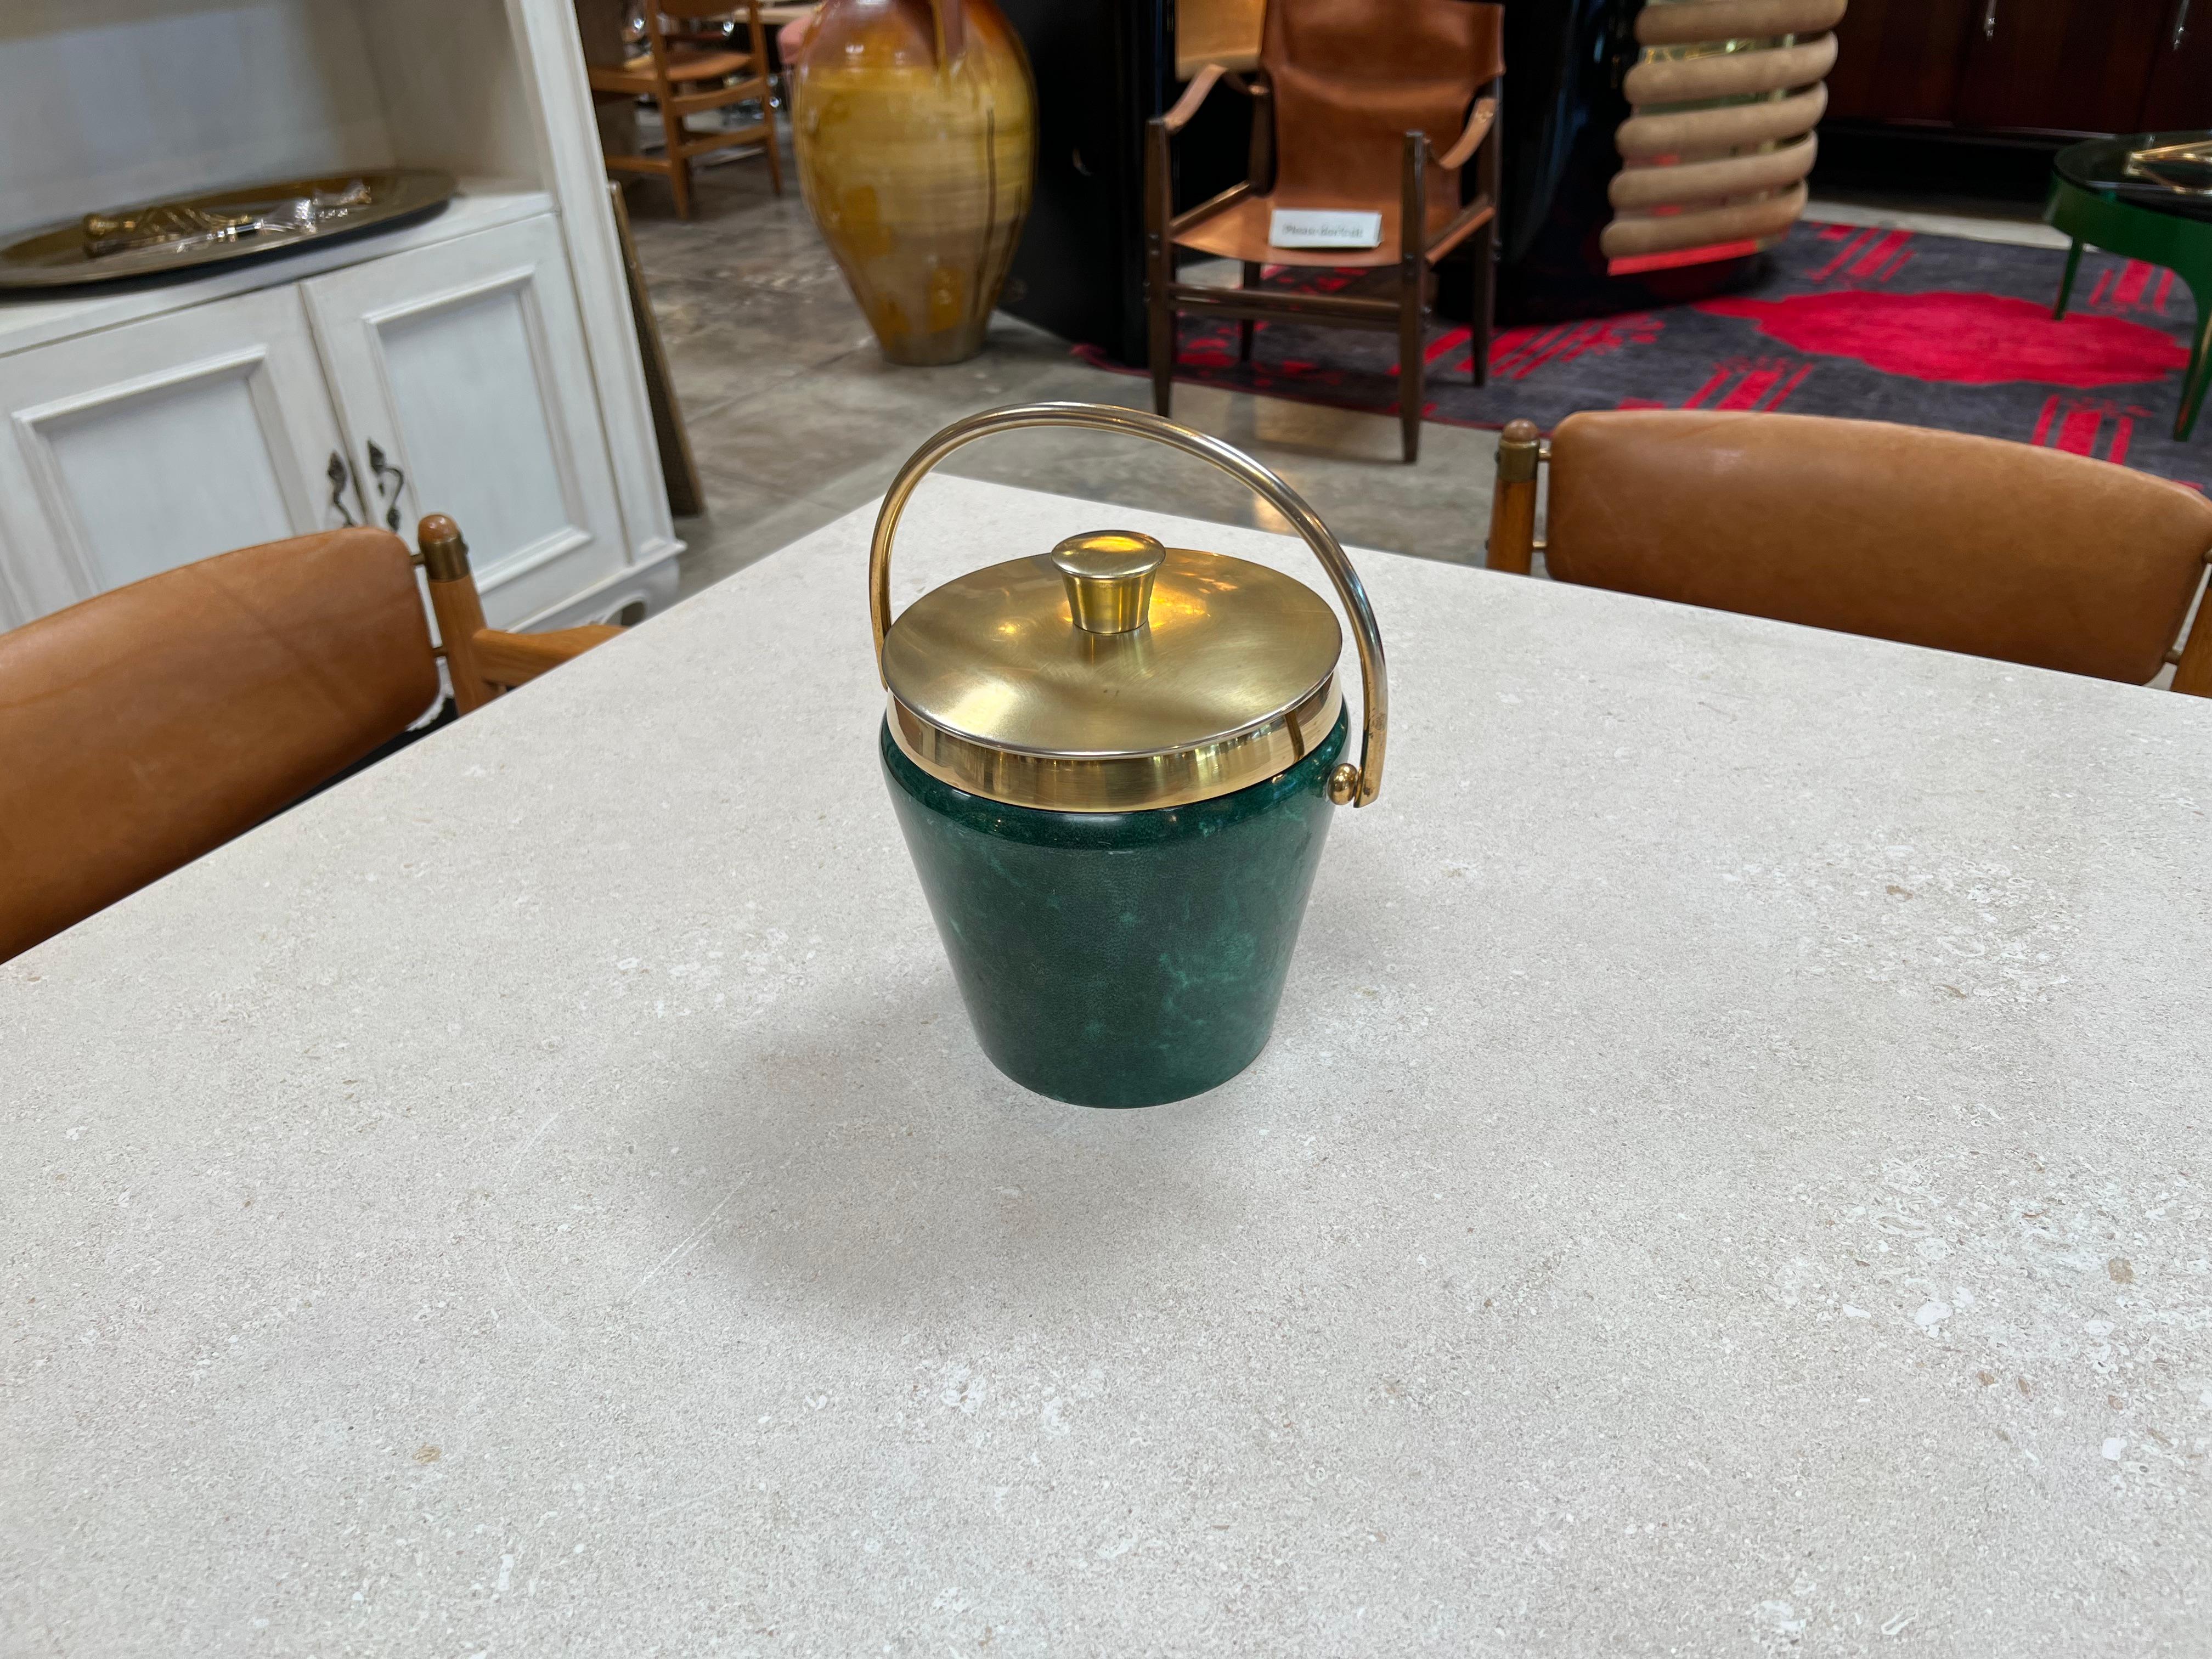 The Vintage Italian Ice Bucket from the 1980s is a charming blend of style and function. With its brass handle and distinctive green color, this ice bucket exudes a touch of vintage elegance. Crafted in Italy, it adds a nostalgic yet timeless flair